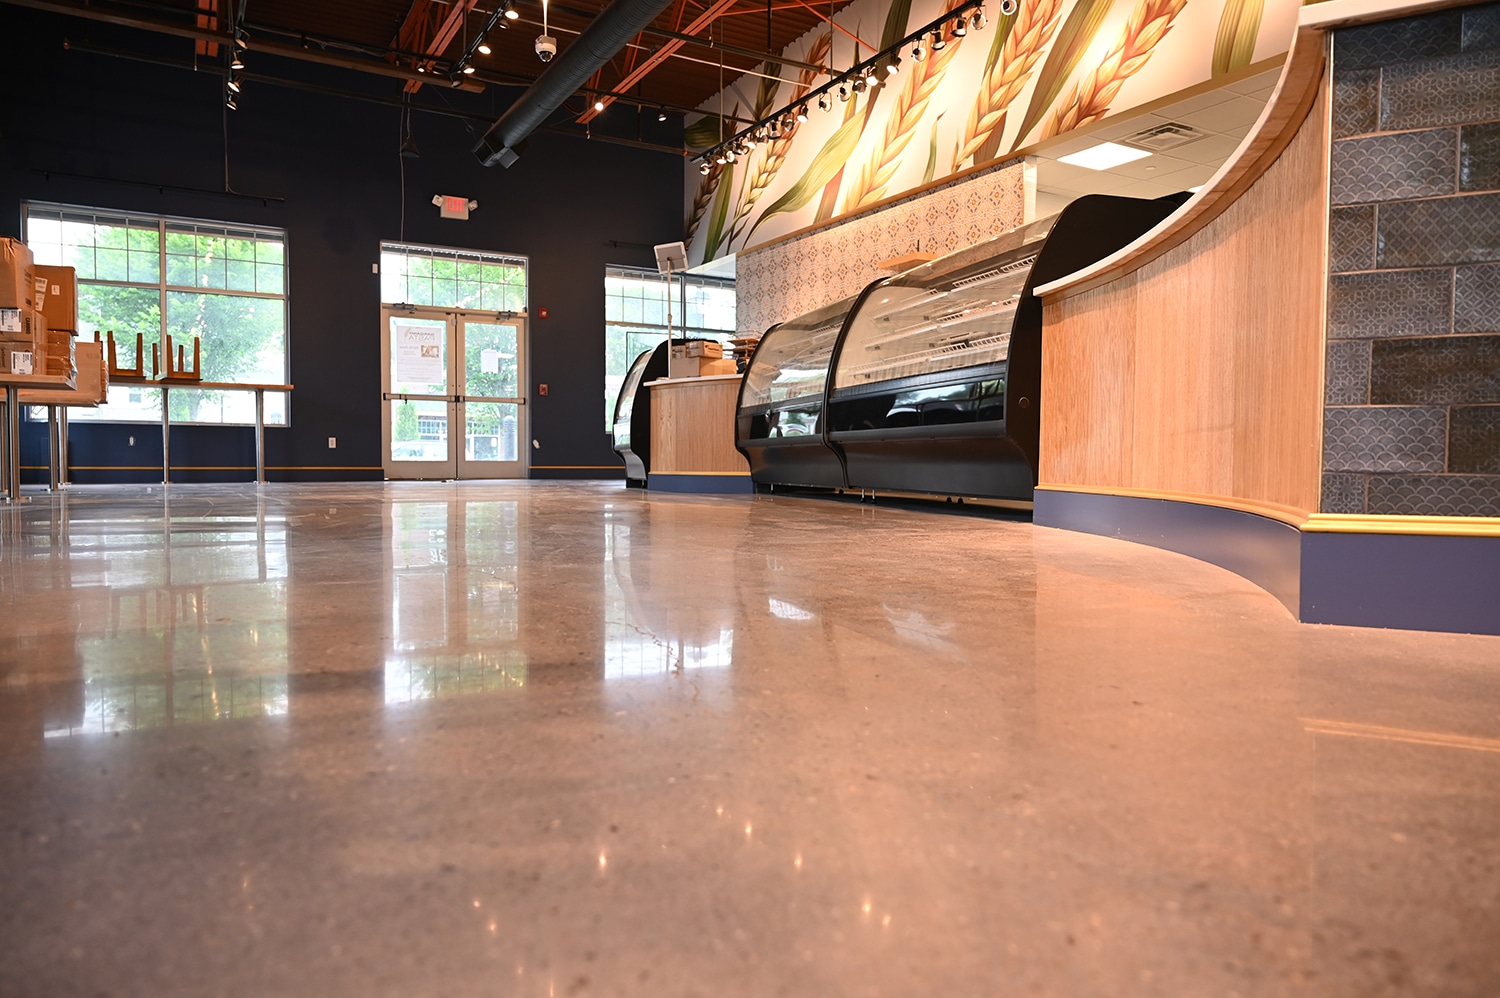 Commercial and Food Service Flooring | Everlast Industrial Flooring contractor in CT and MA